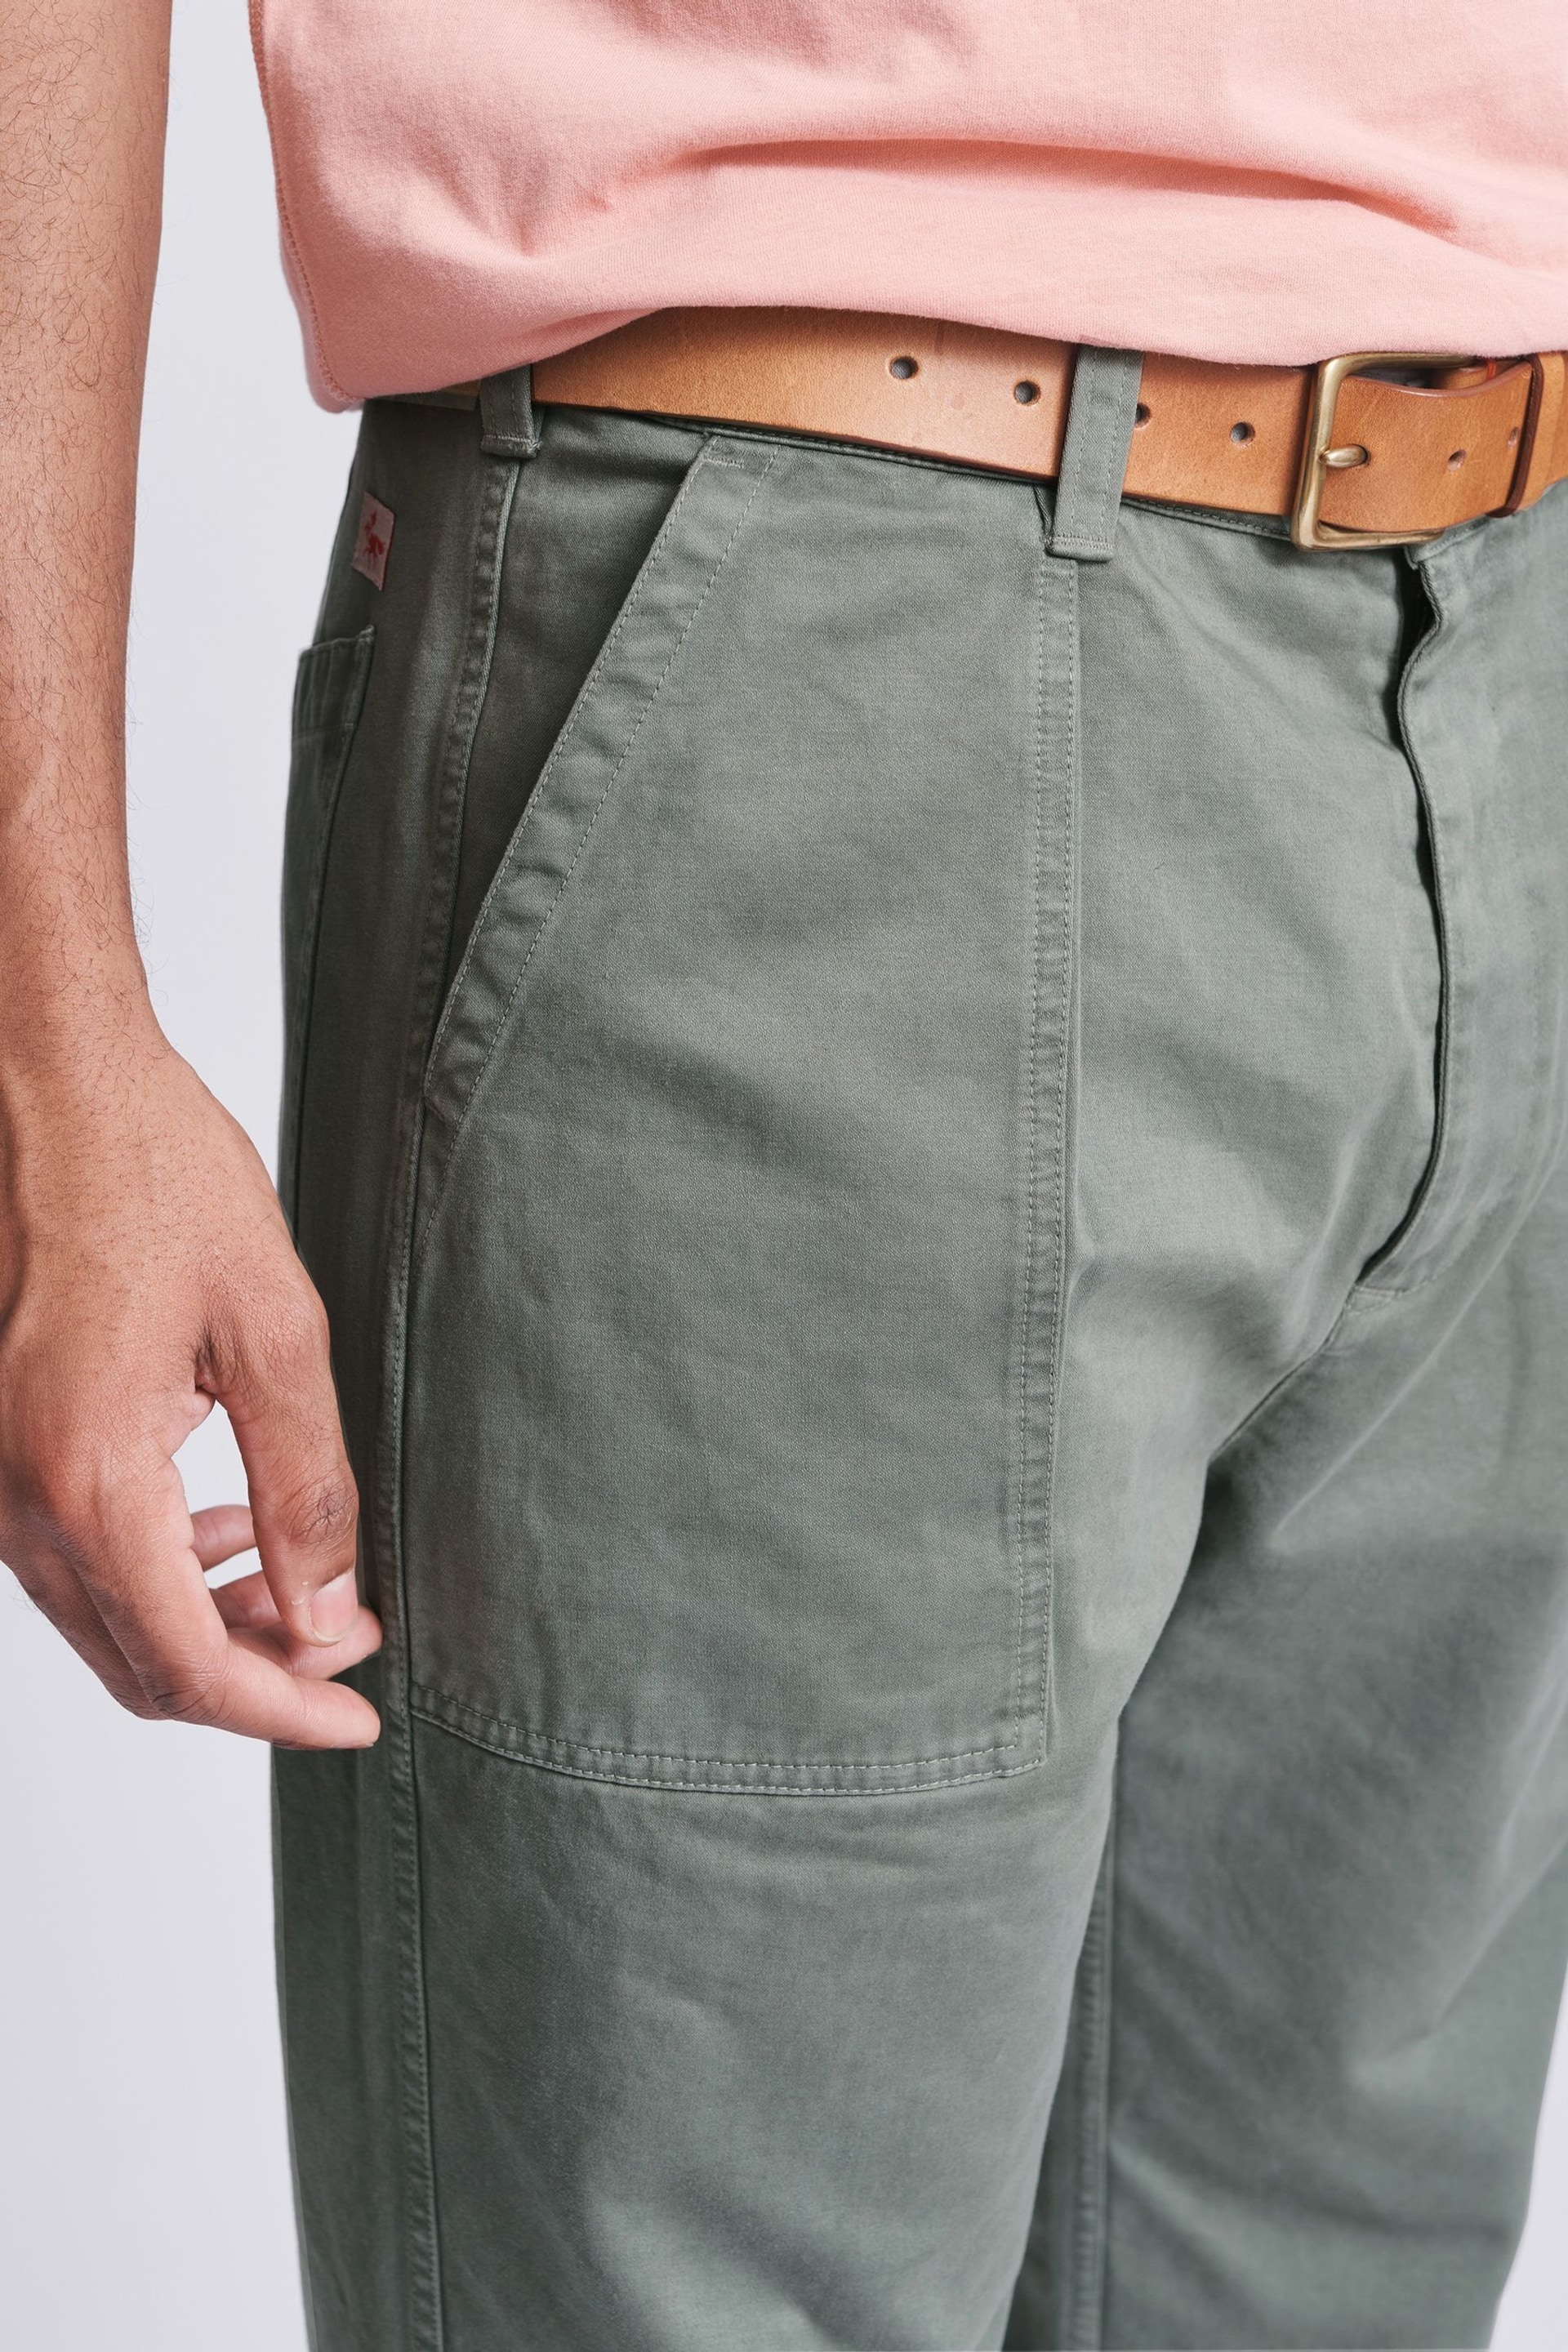 Aubin Beck Military Trousers - Image 4 of 6